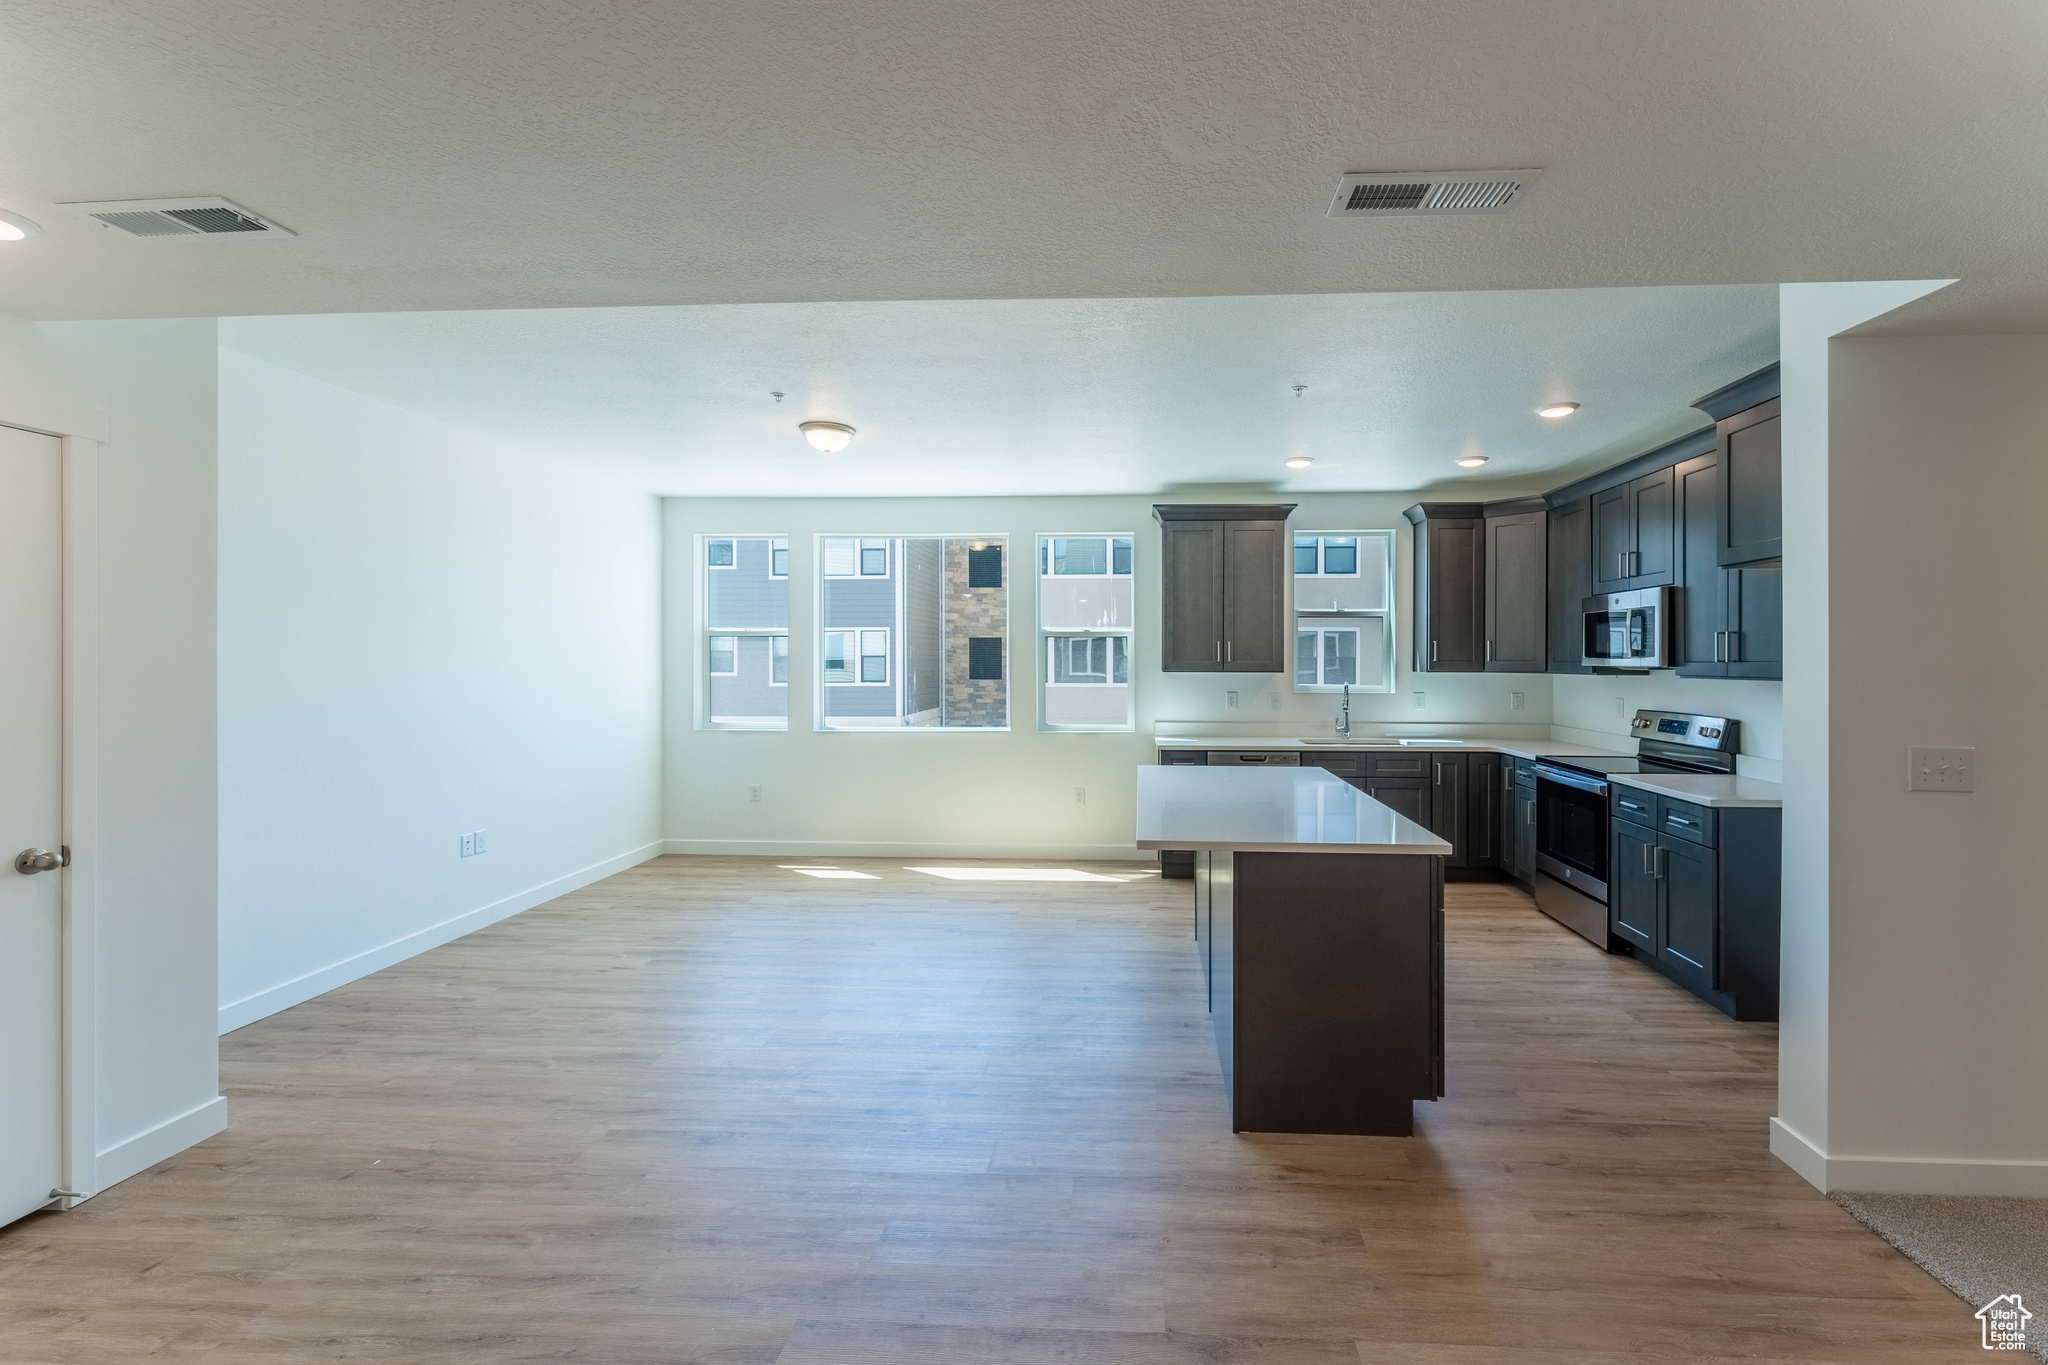 Kitchen featuring a kitchen island, appliances with stainless steel finishes, and light hardwood / wood-style floors